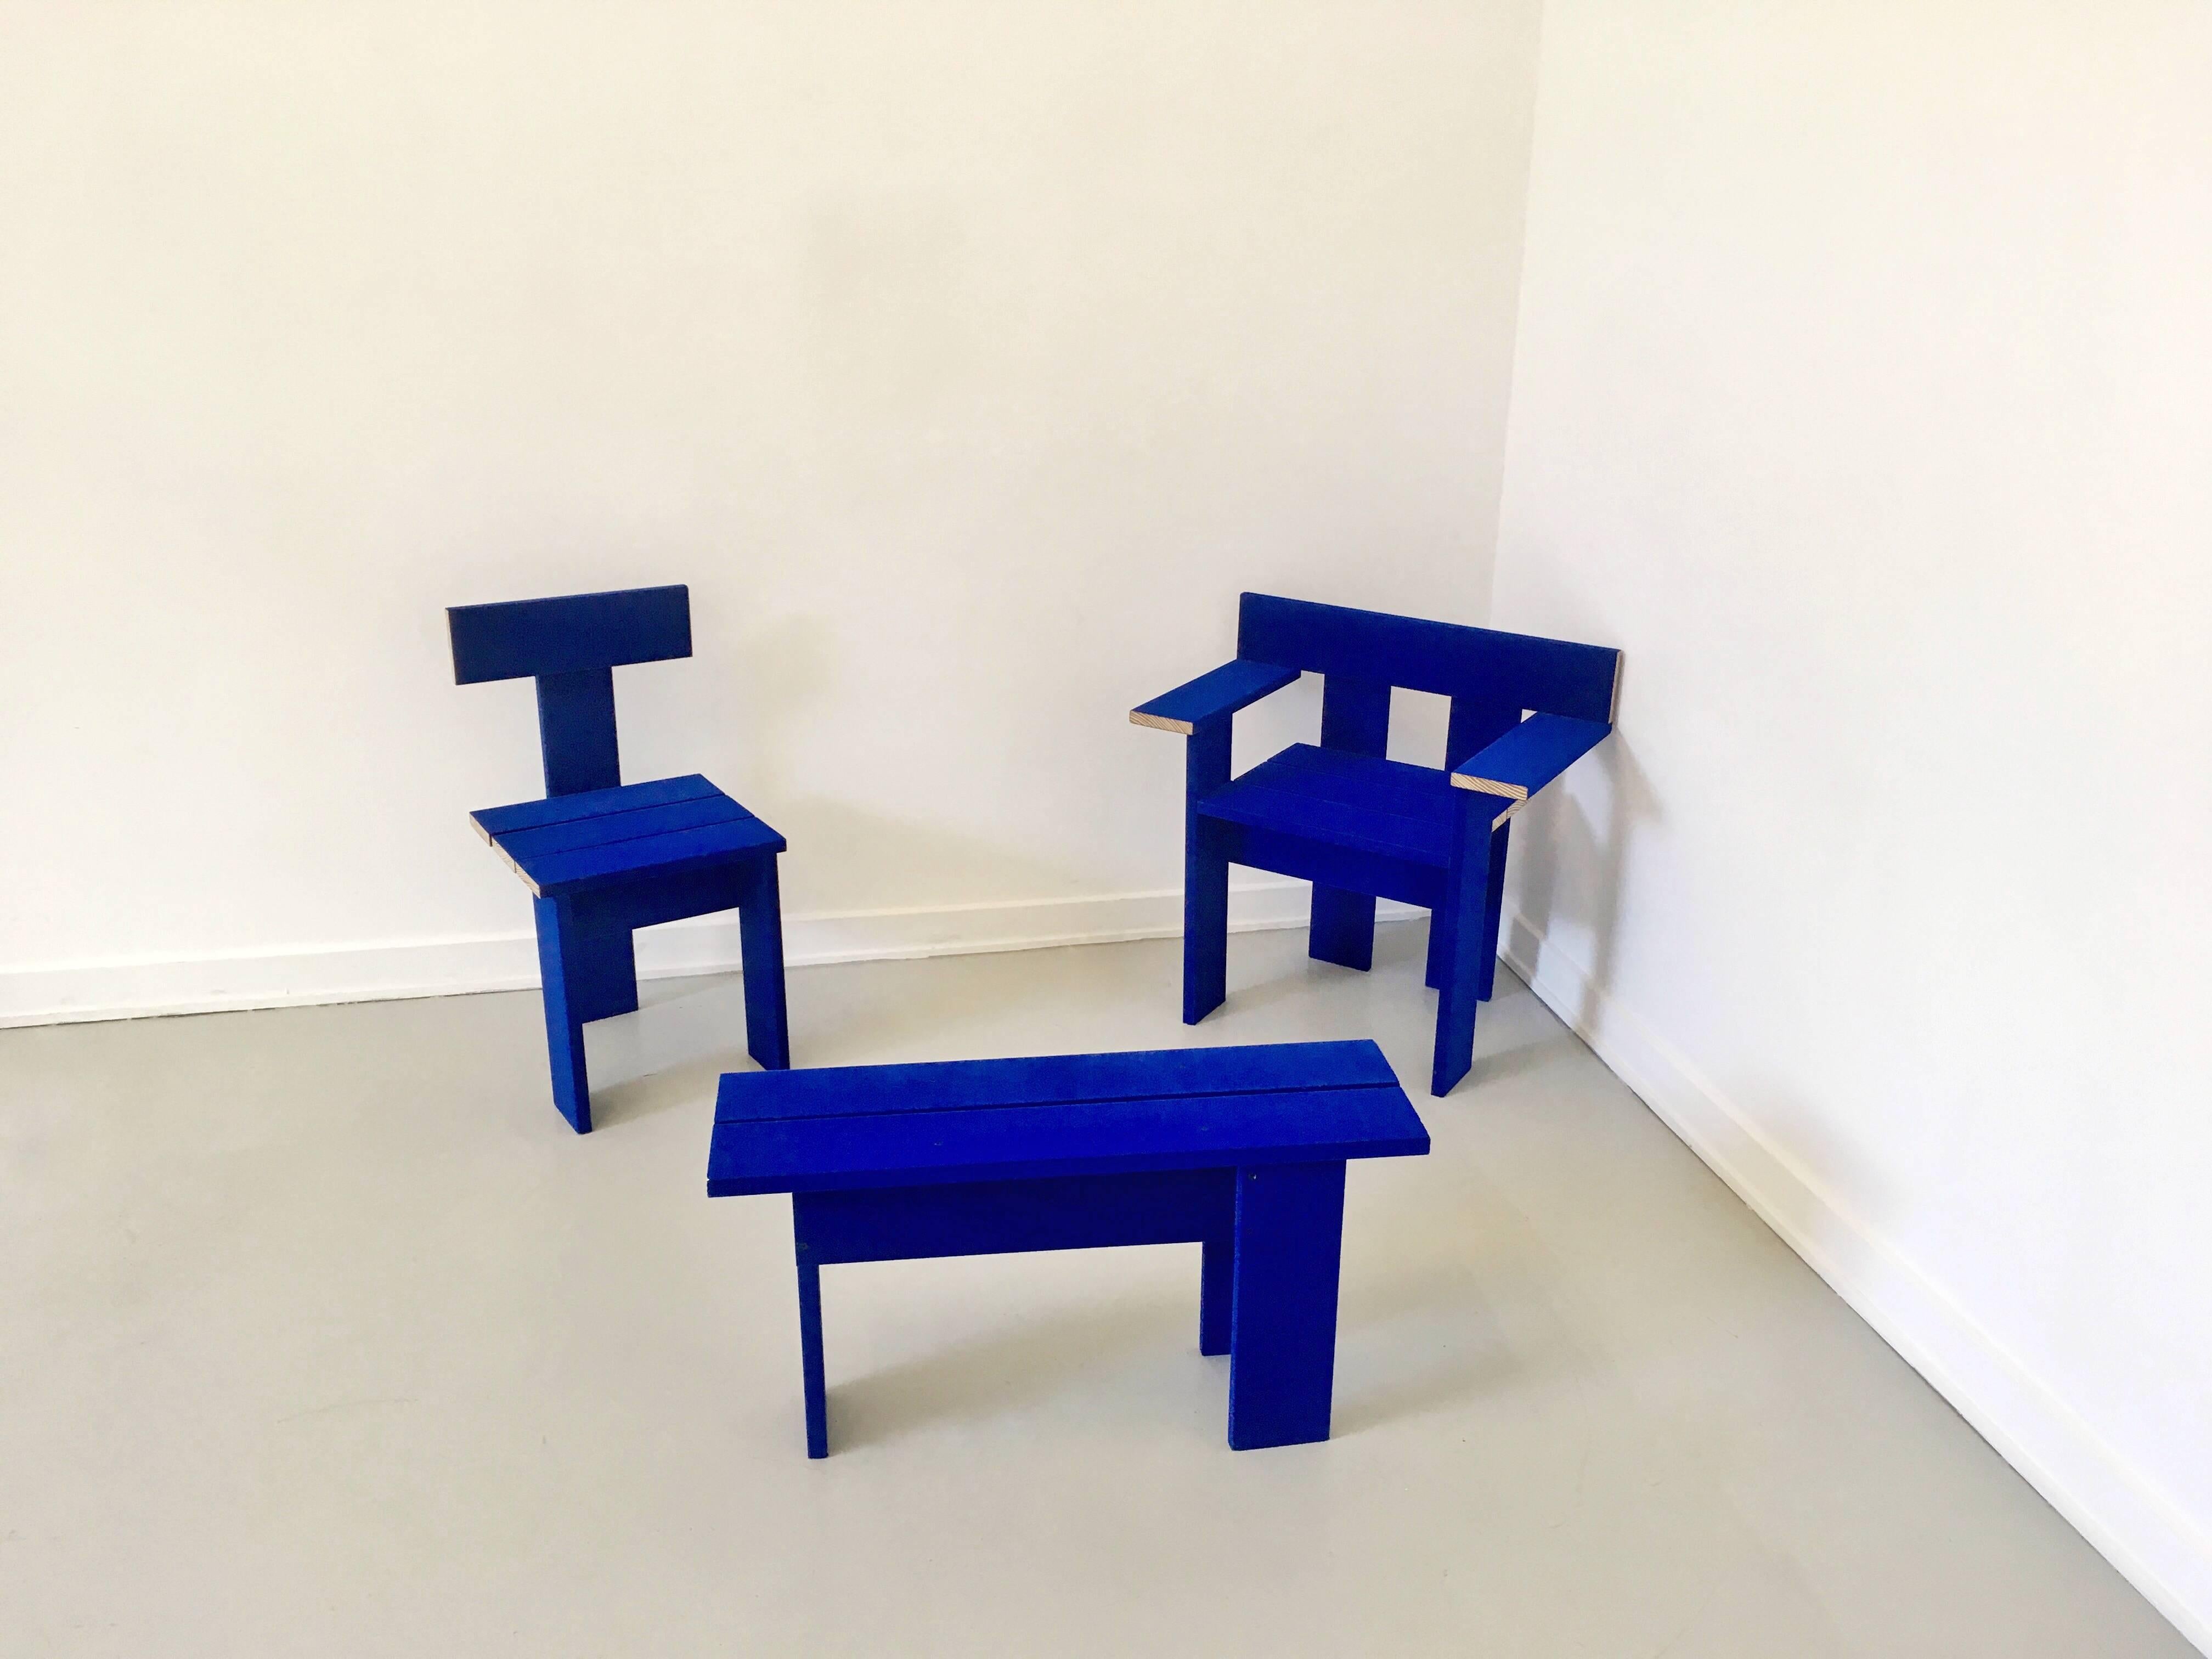 Blue textile covered wooden chair by London based design duo Soft Baroque, previously shown at Het Nieuwe Institut.

Renderings are becoming more diabolic and sophisticated, representations of reality are appearing in higher resolution. Meanwhile in